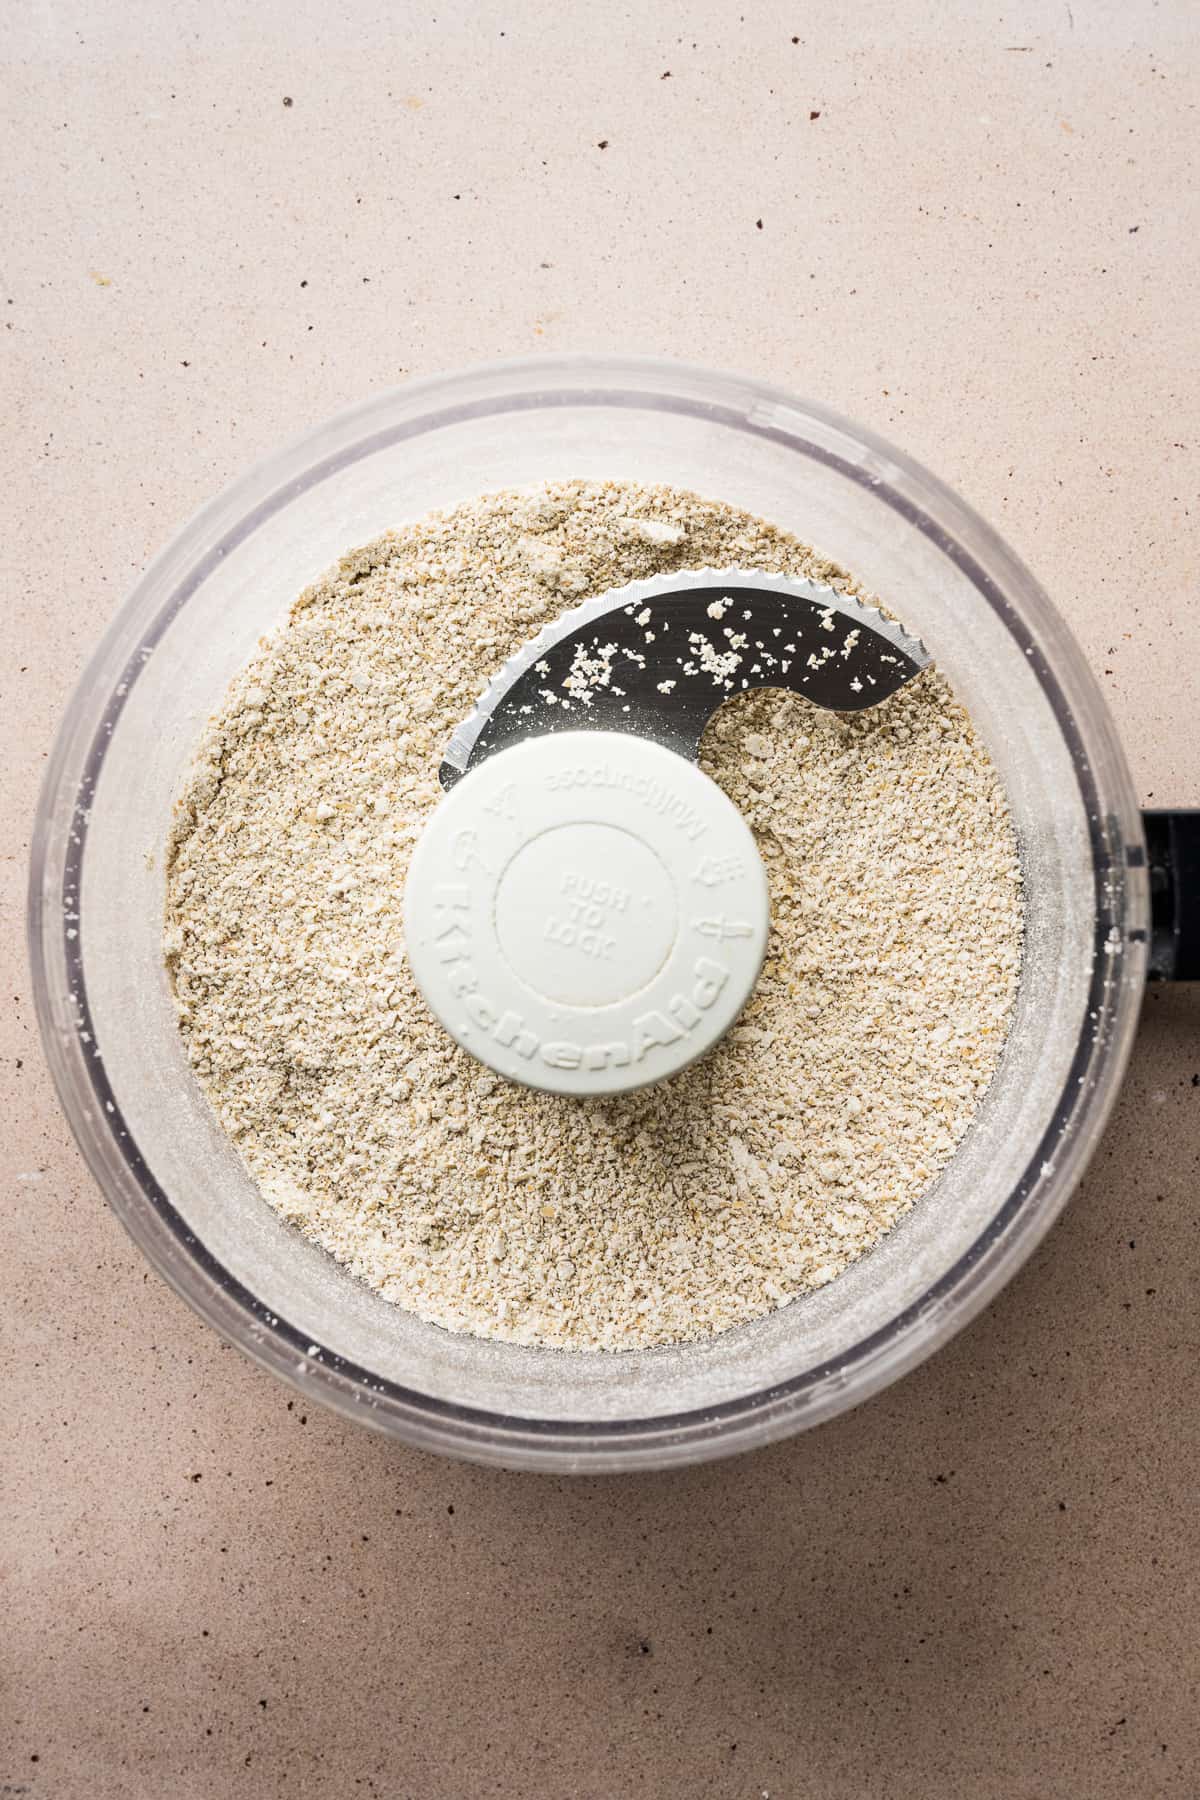 A food processor with ground oats.